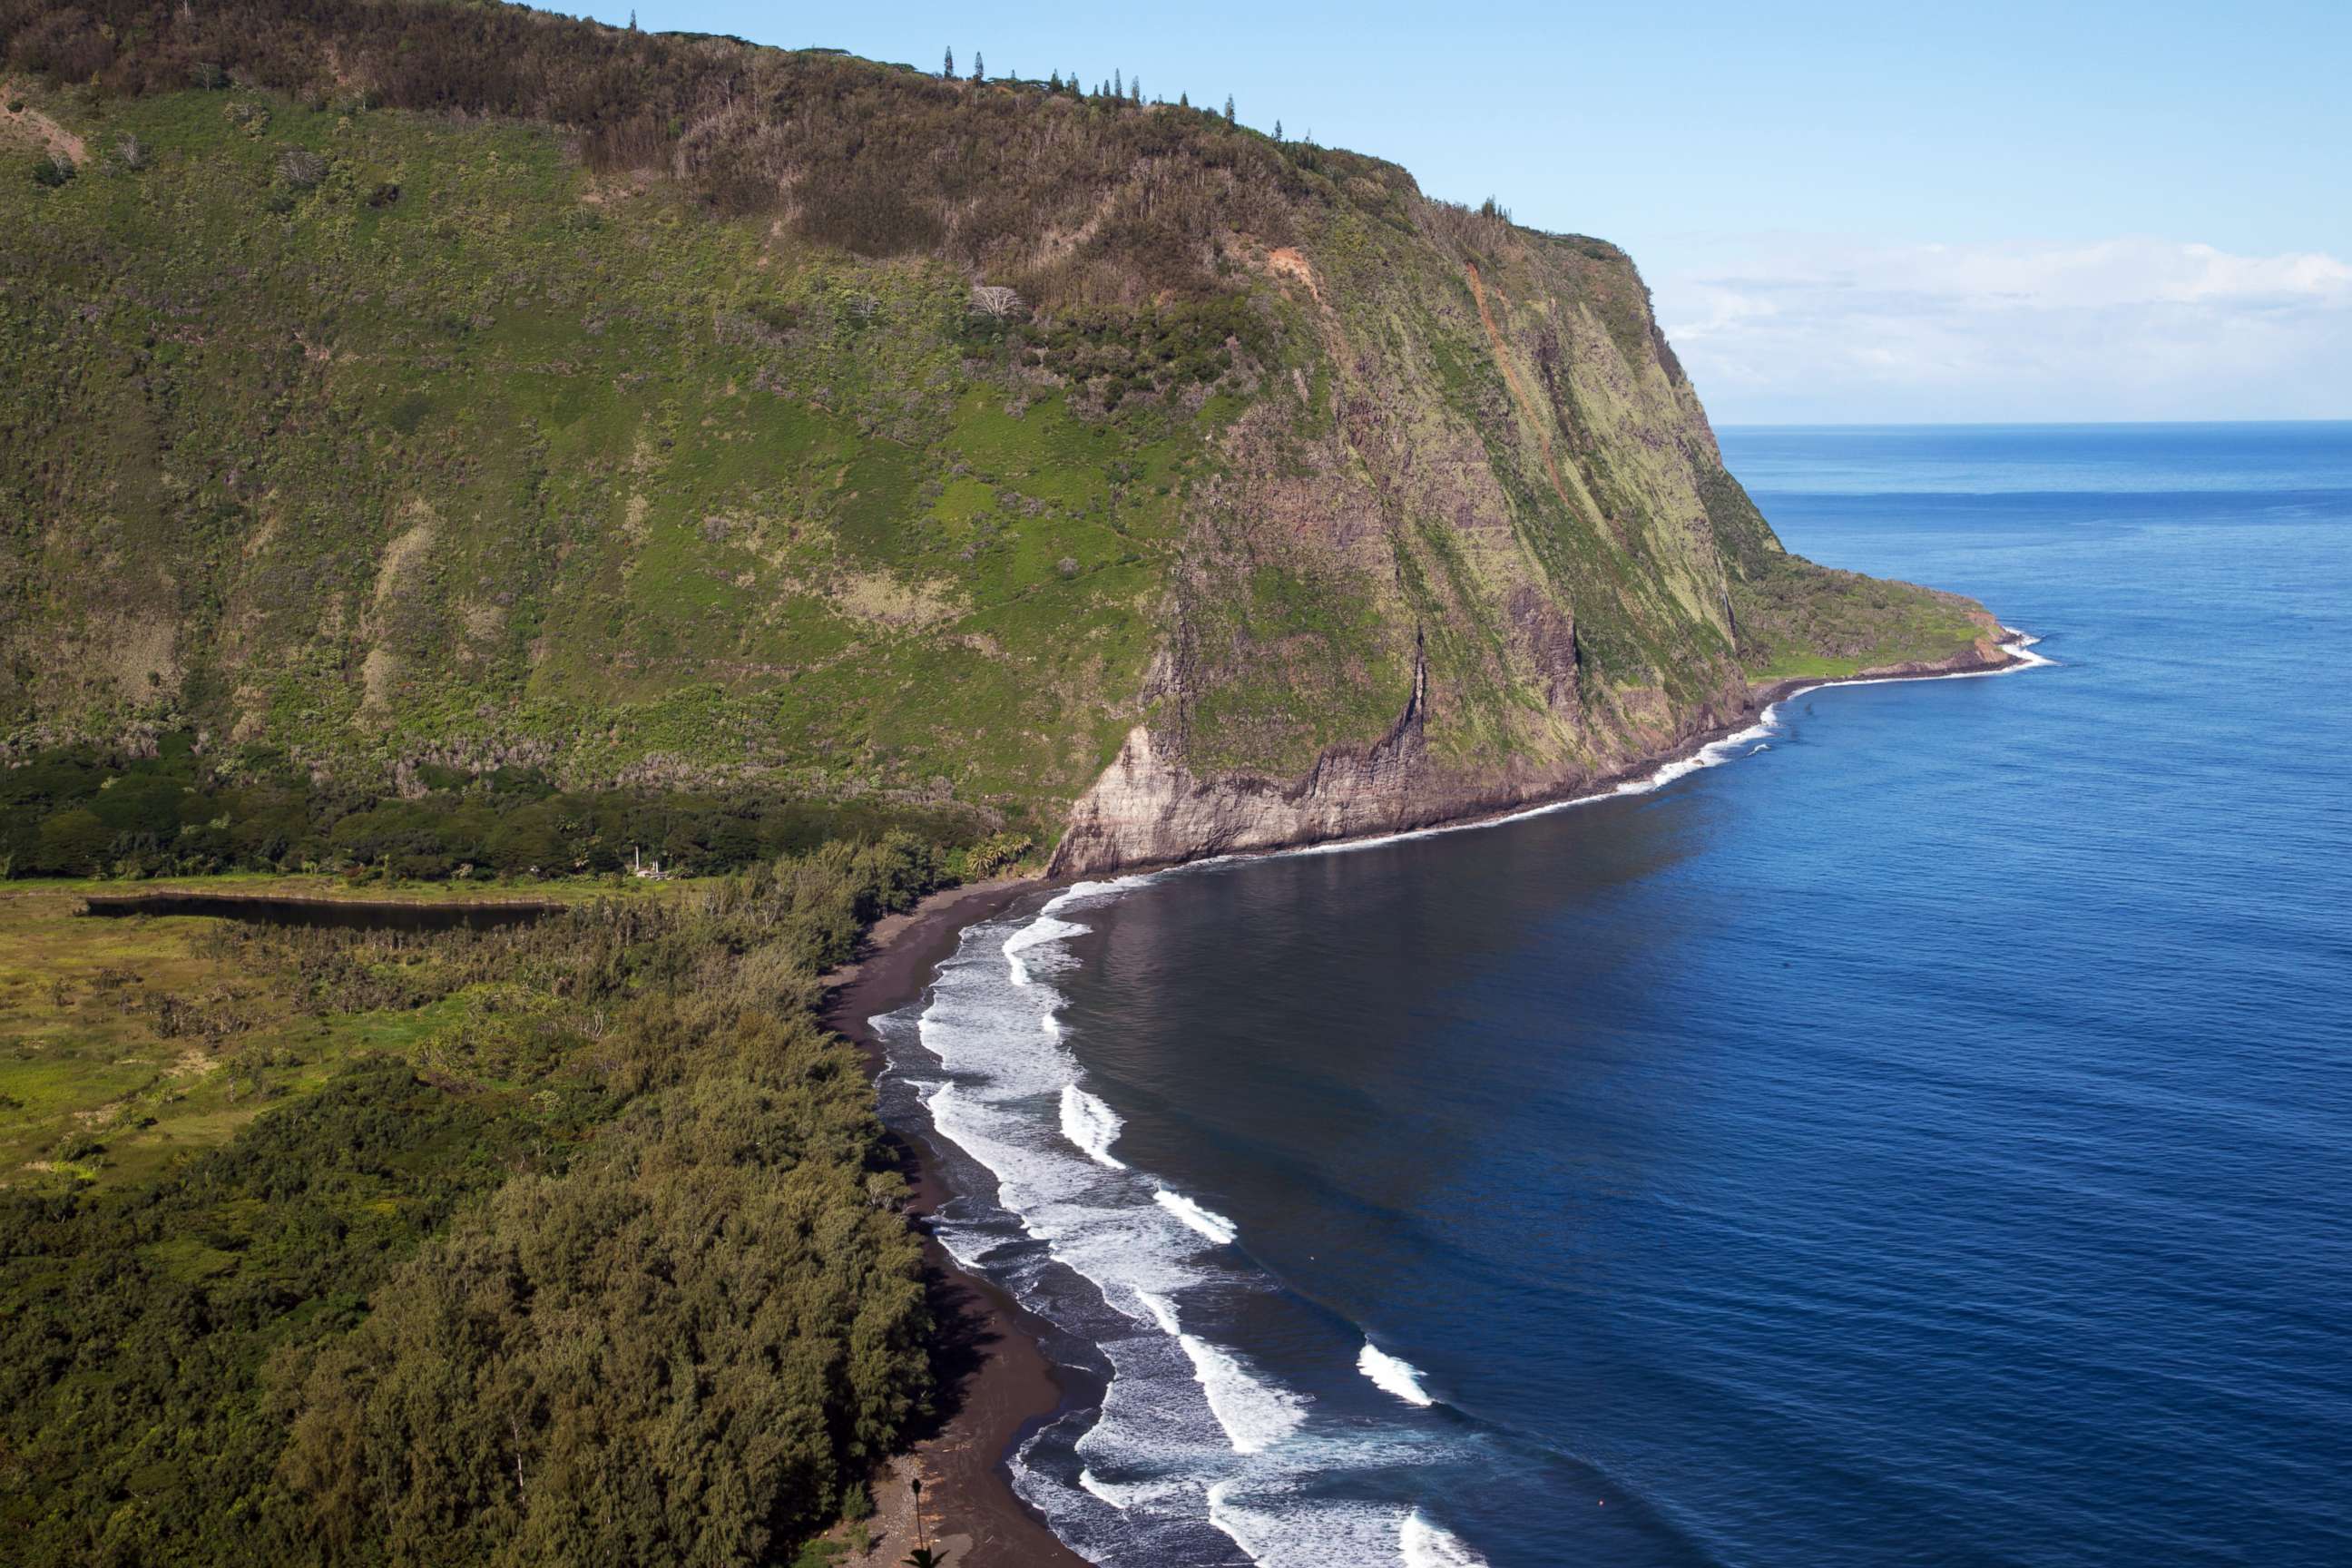 PHOTO: Black Sand Beach at Waipio Valley -  the residence of early Hawaiian kings.  A steep road leads down into Waipio Valley from a lookout point on the Big Island of Hawaii, Jan. 16, 2013.